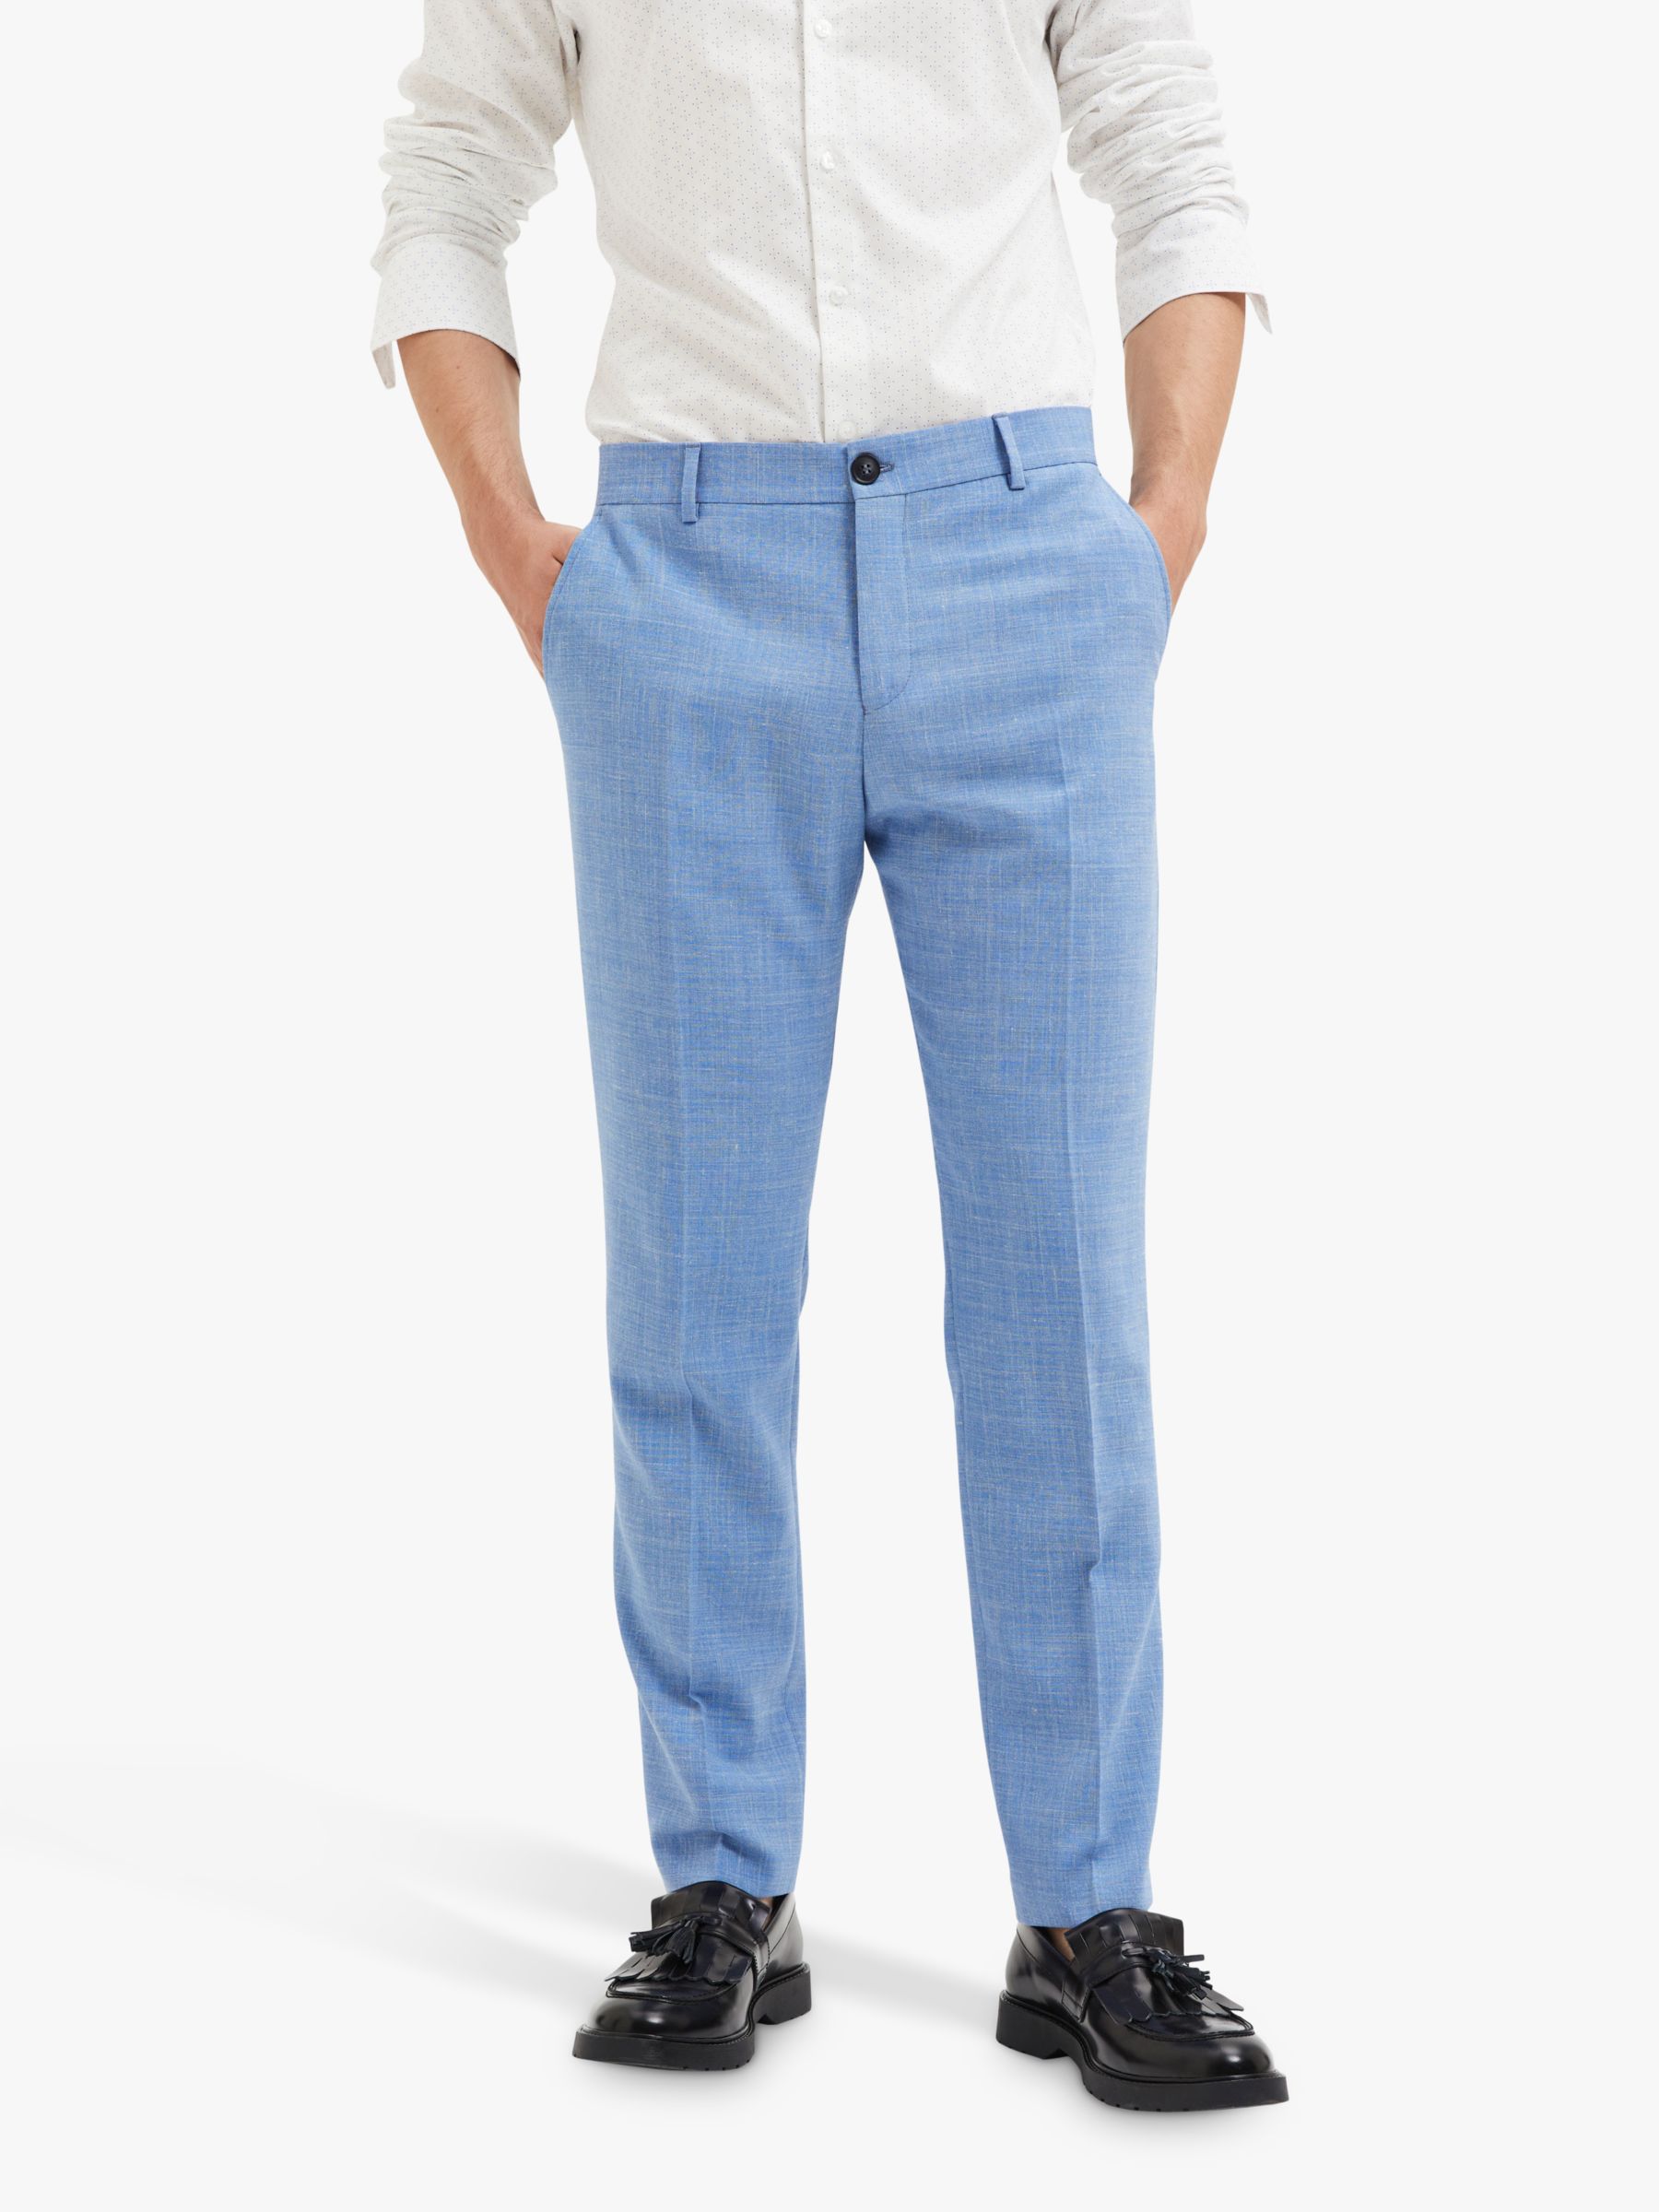 Buy SELECTED HOMME Slim Fit Linen Blend Trousers Online at johnlewis.com